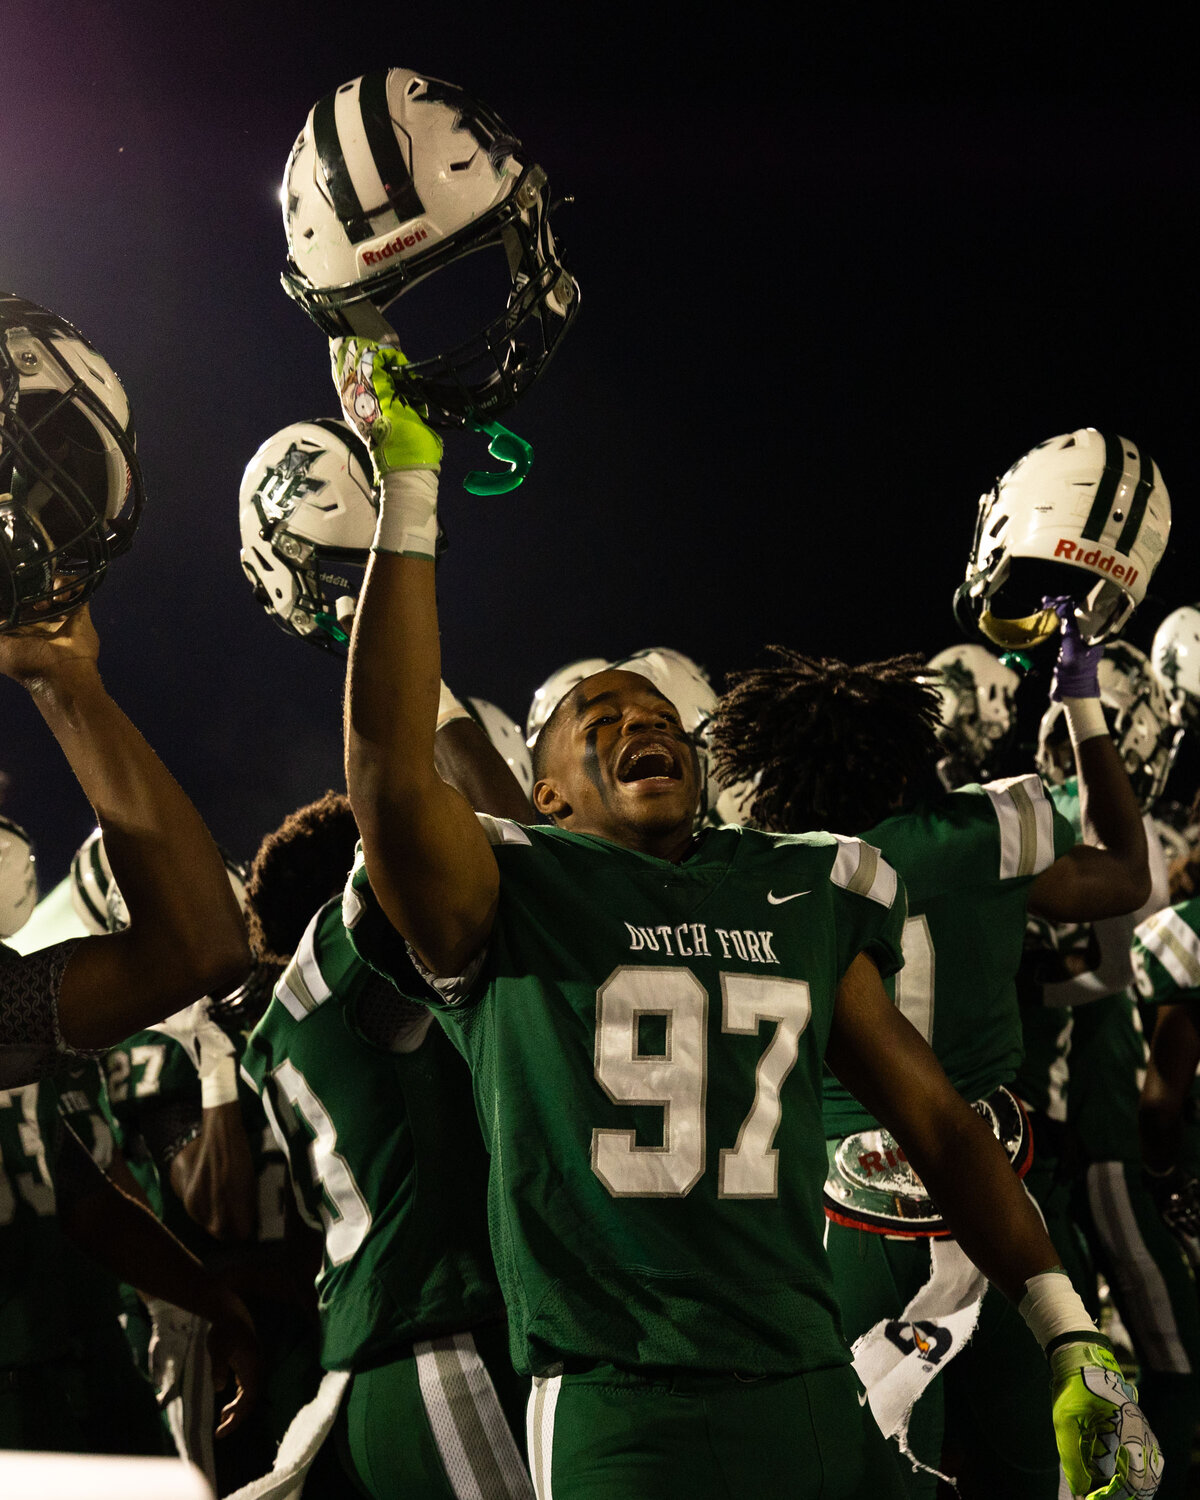 Dutch Fork Silver Foxes made a statement in the first round of the SCHSL playoffs with a 55-7 win Nov. 3 over Boiling Springs.